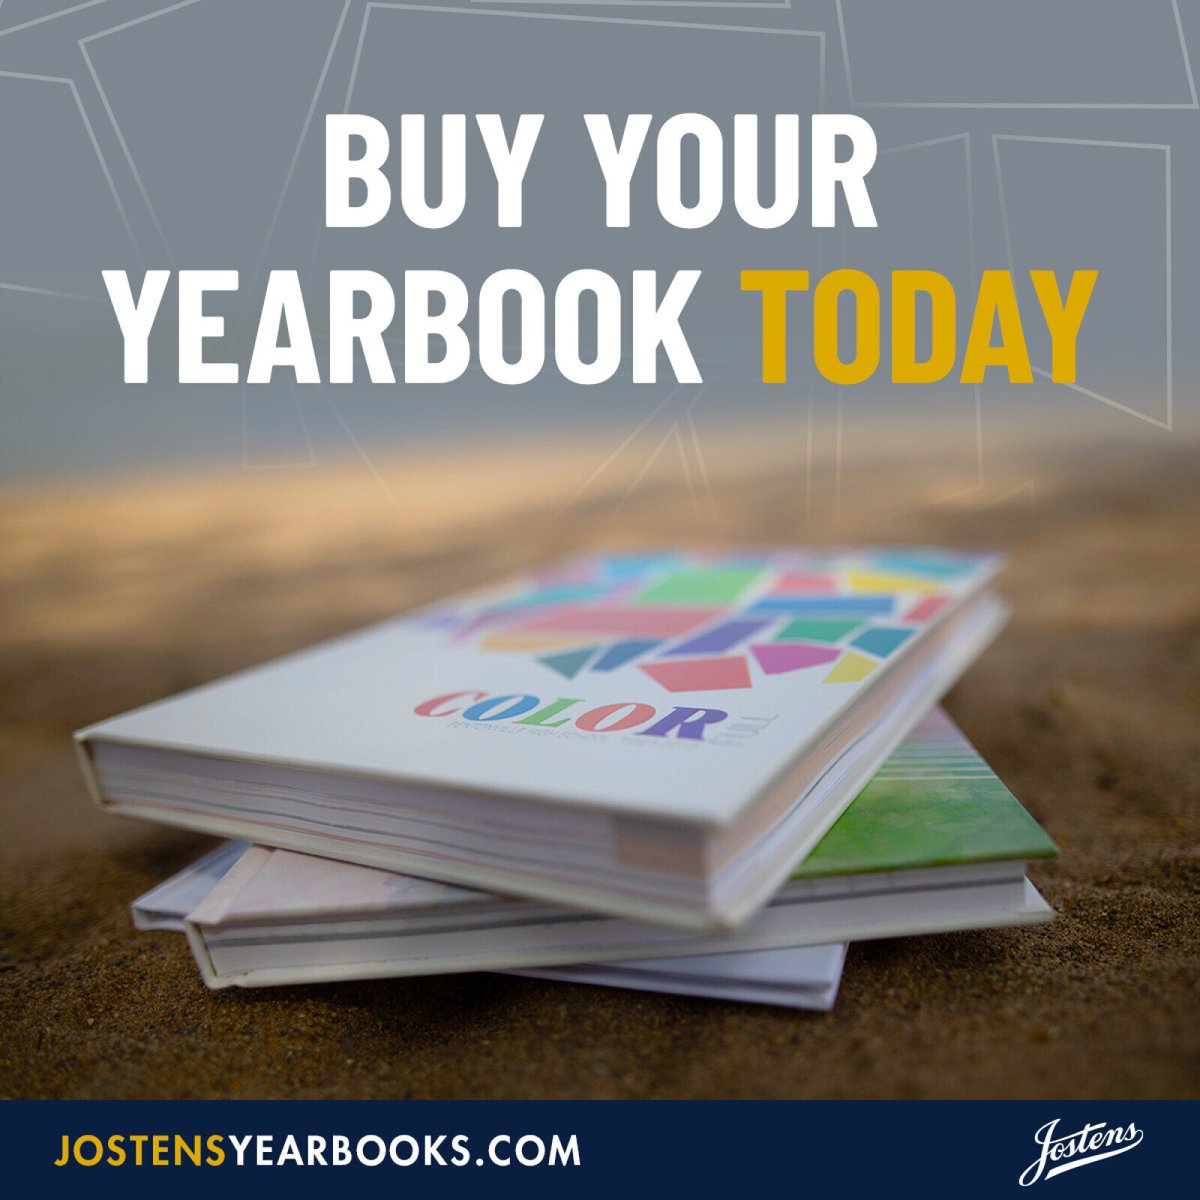 Make today the day you buy your yearbook. Order your copy here: jostensyearbooks.com/?REF=A01088441 Online orders will close on May 17. Afterwards your request will be put on a waitlist.